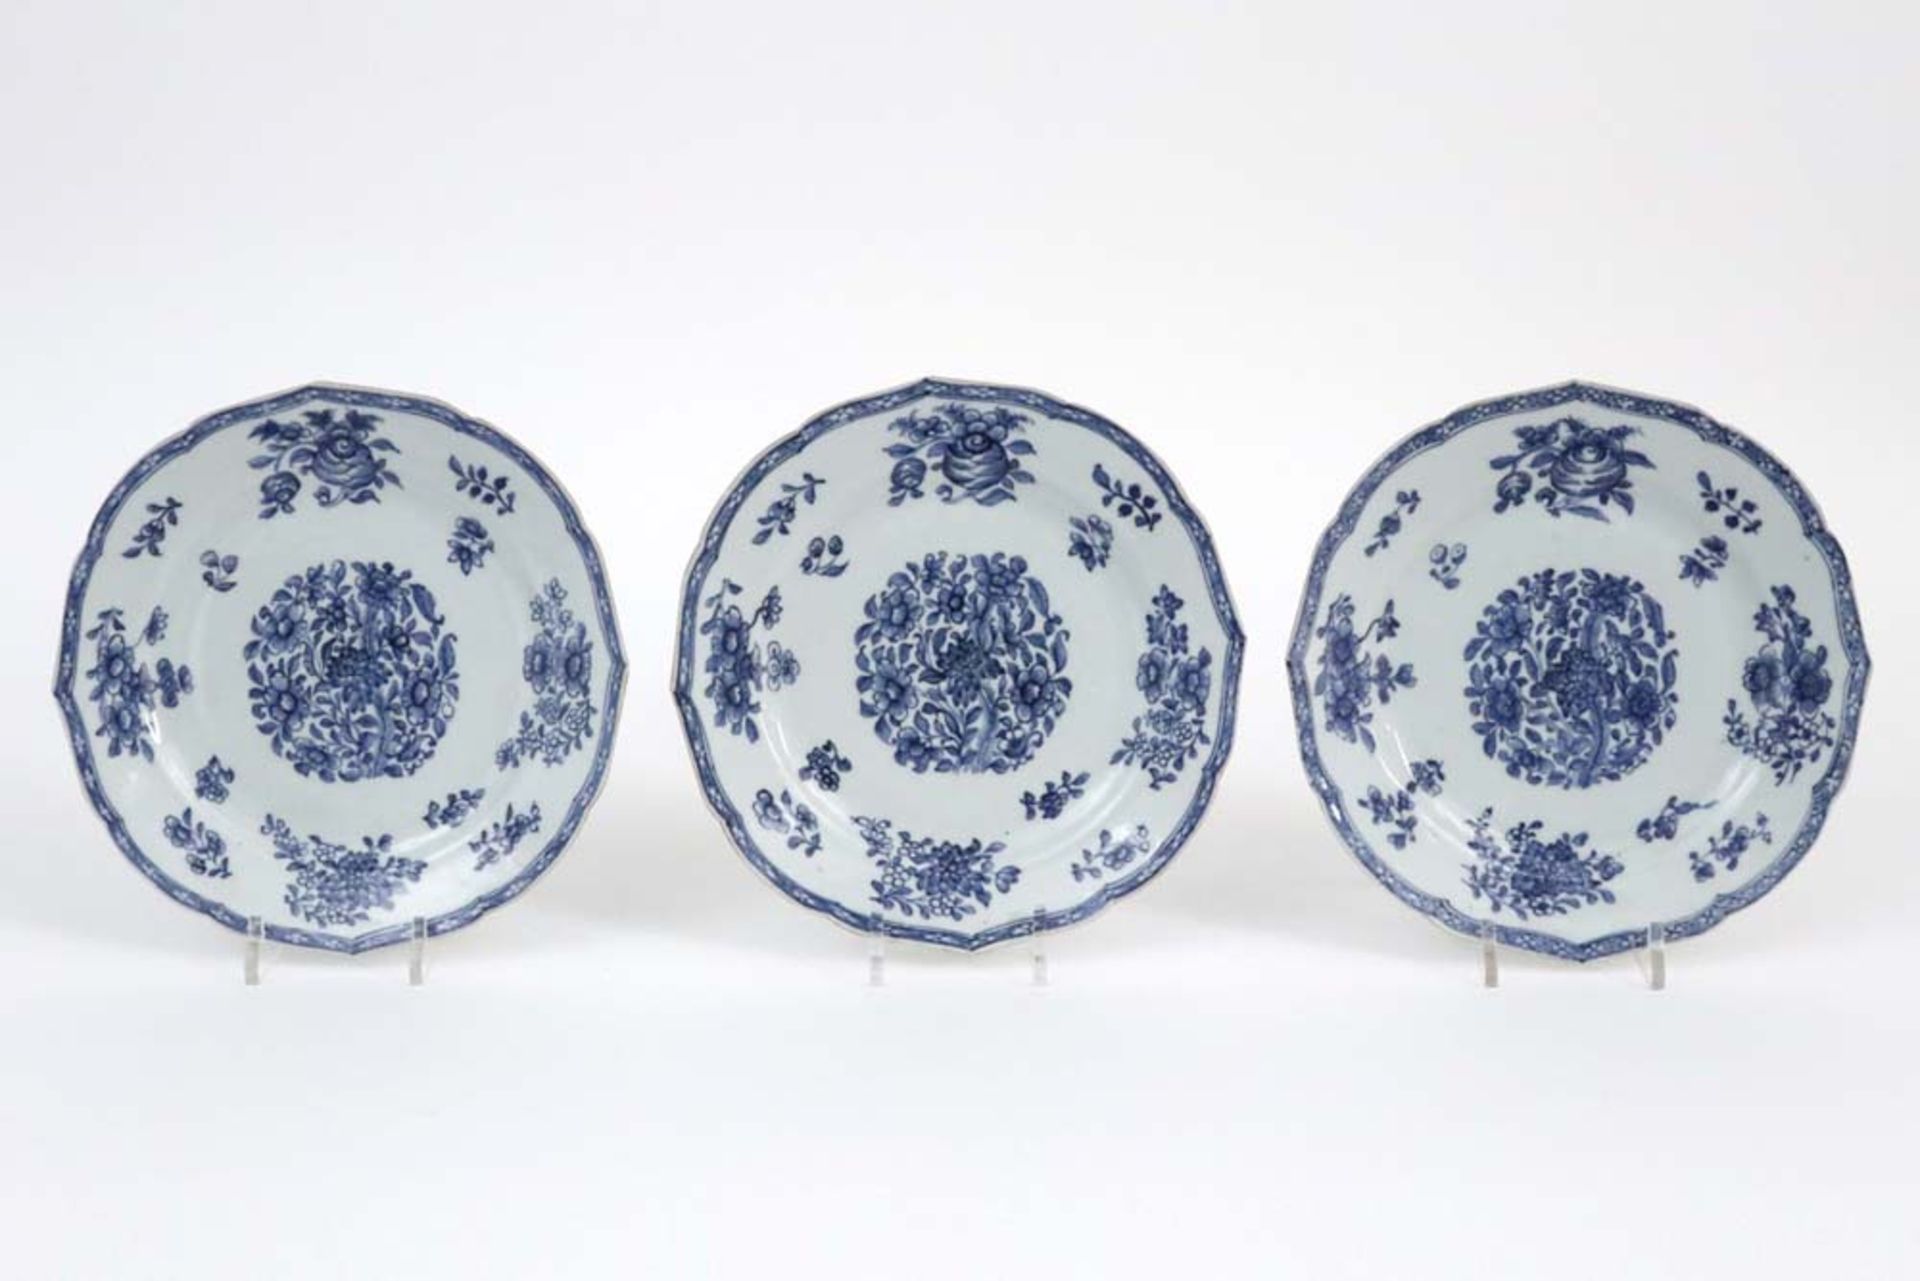 set of three 18th Cent. Chinese plates in porcelain with a blue-white flowers decor || Serie van